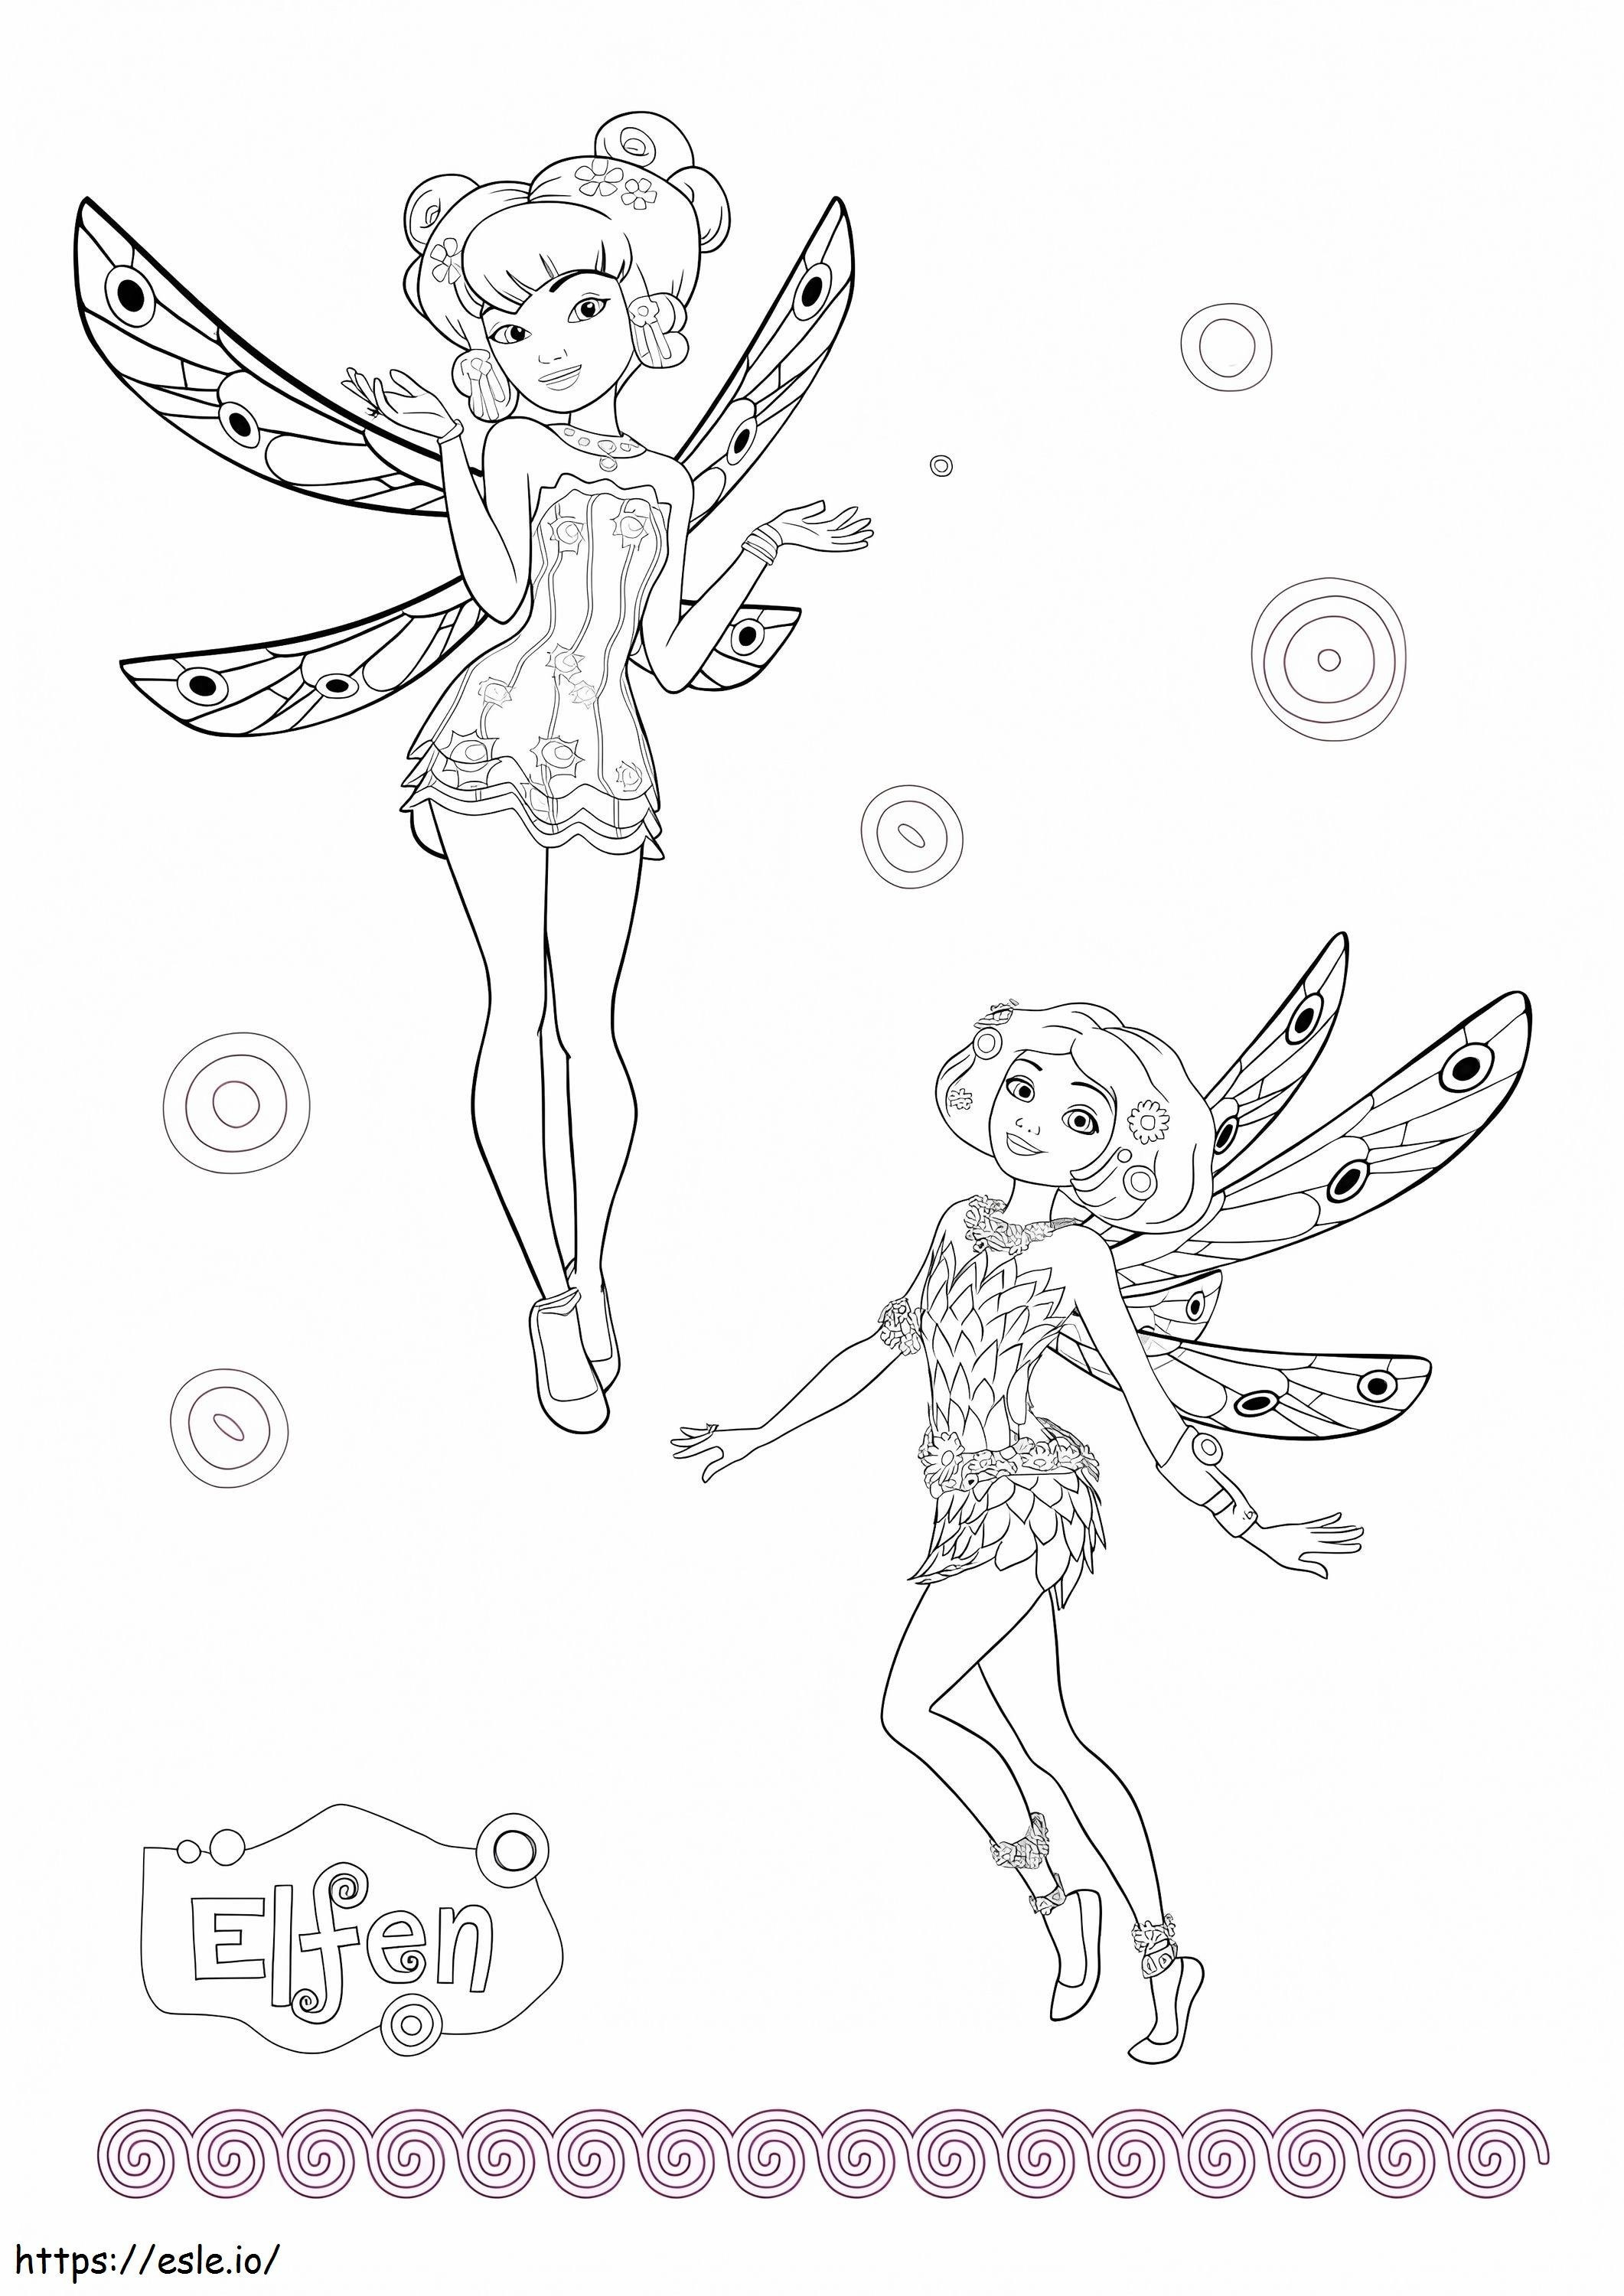 Elves From Mia And Me coloring page